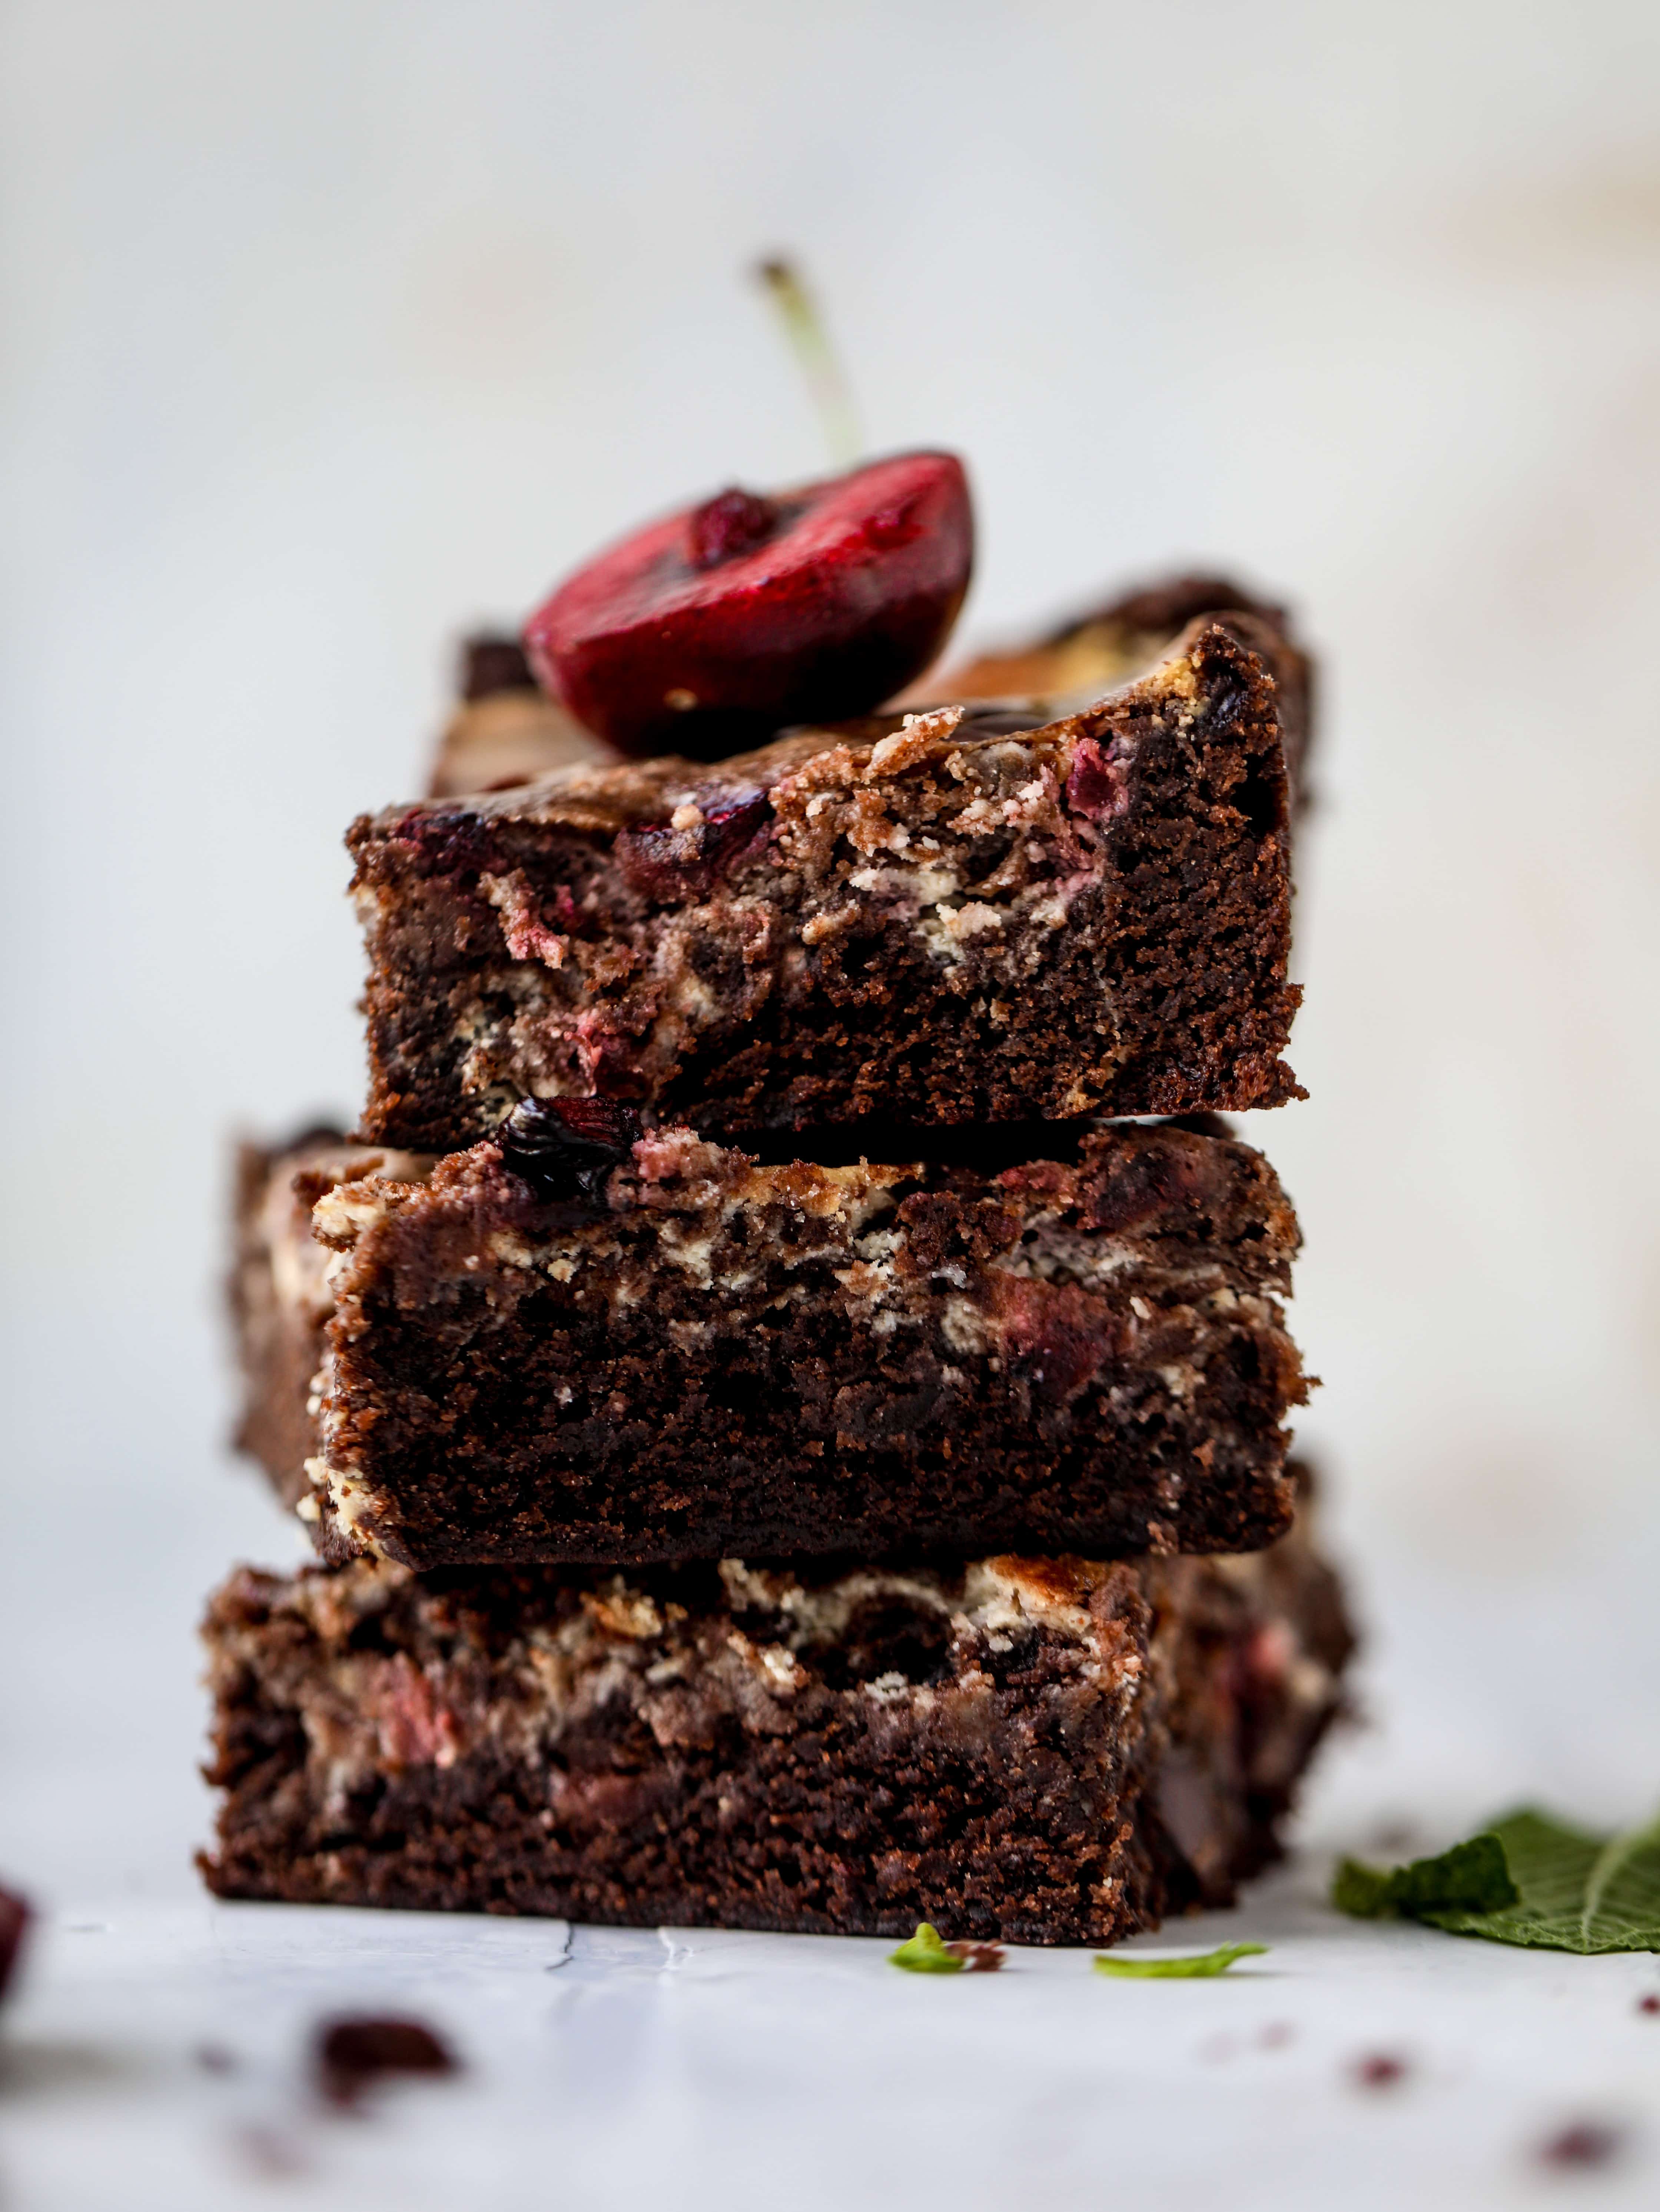 These cherry cheesecake swirl brownies are super rich and fudgy, filled with dark chocolate and fresh cherry, topped with a cherry cheesecake swirl.